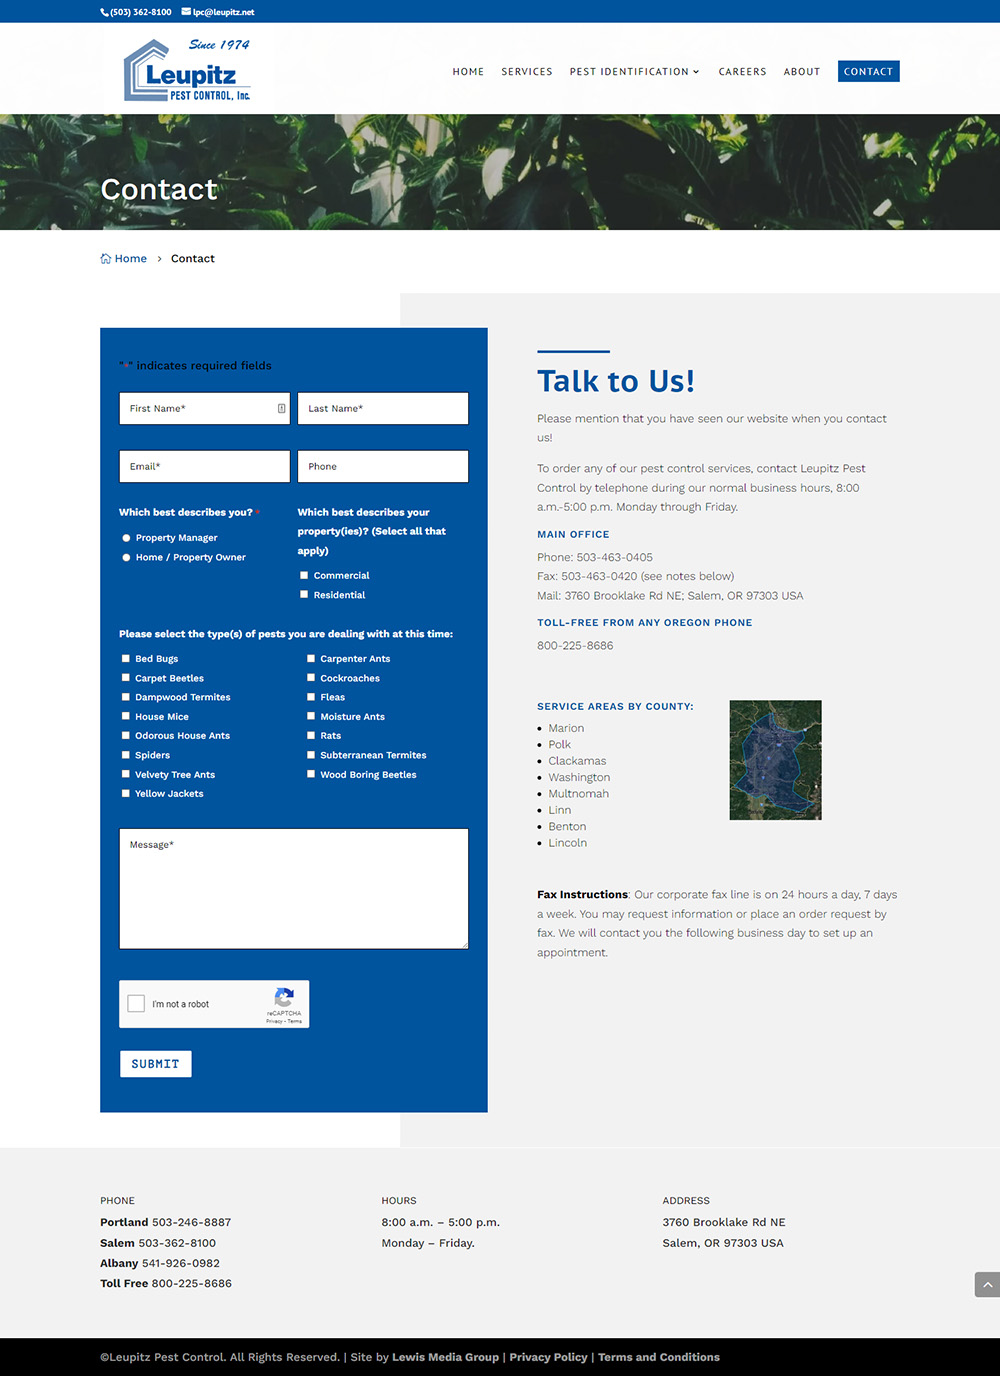 Leupitz Pest Control contact page after redesign